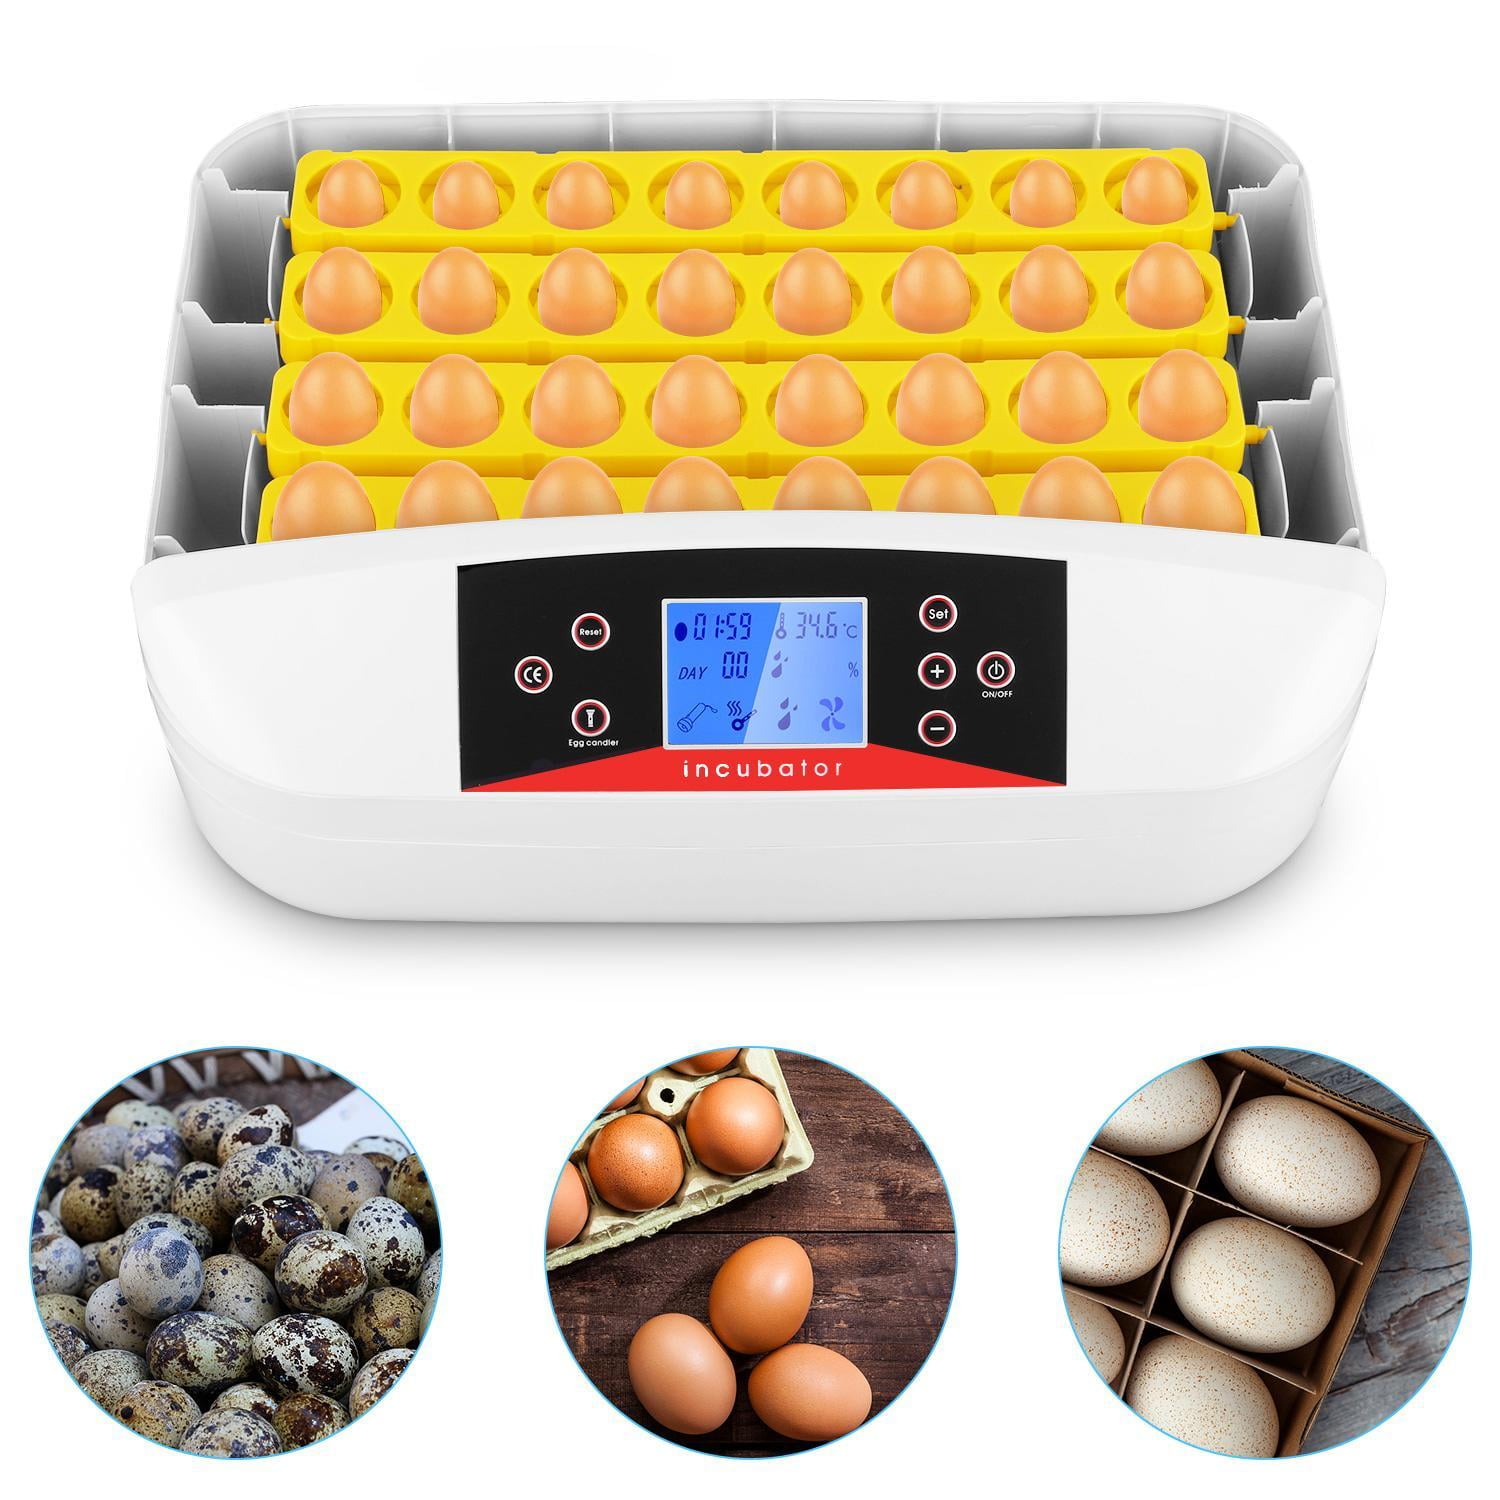 Poultry Chicken Quail 32 EGG DIGITAL INCUBATOR AUTOMATIC TURNER Local USA Dealer 